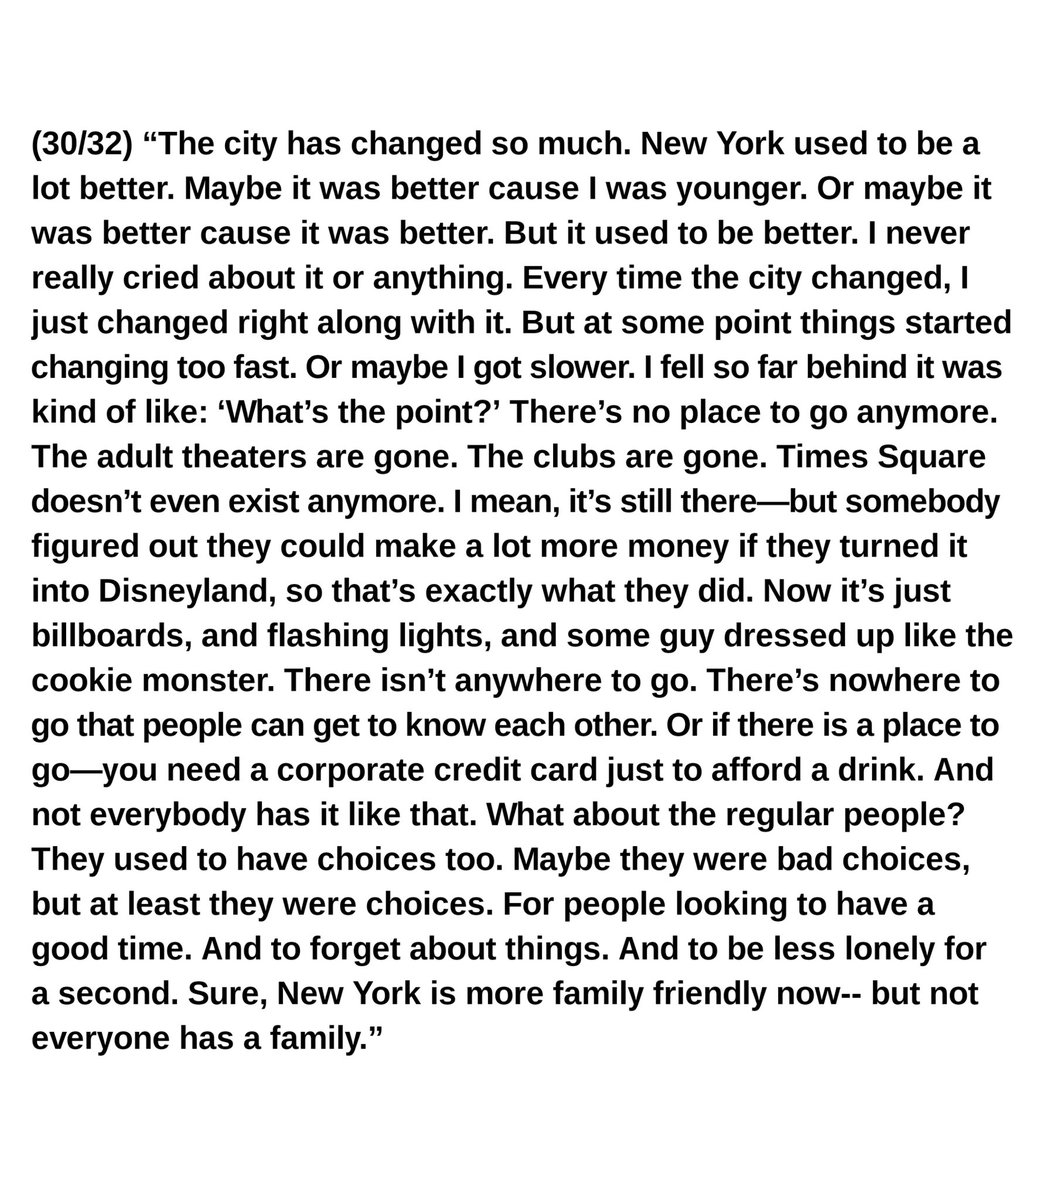 (30/32) “The city has changed so much. New York used to be a lot better. Maybe it was better cause I was younger. Or maybe it was better cause it was better. But it used to be better. I never really cried about it or anything..." #TattletalesfromTanqueray